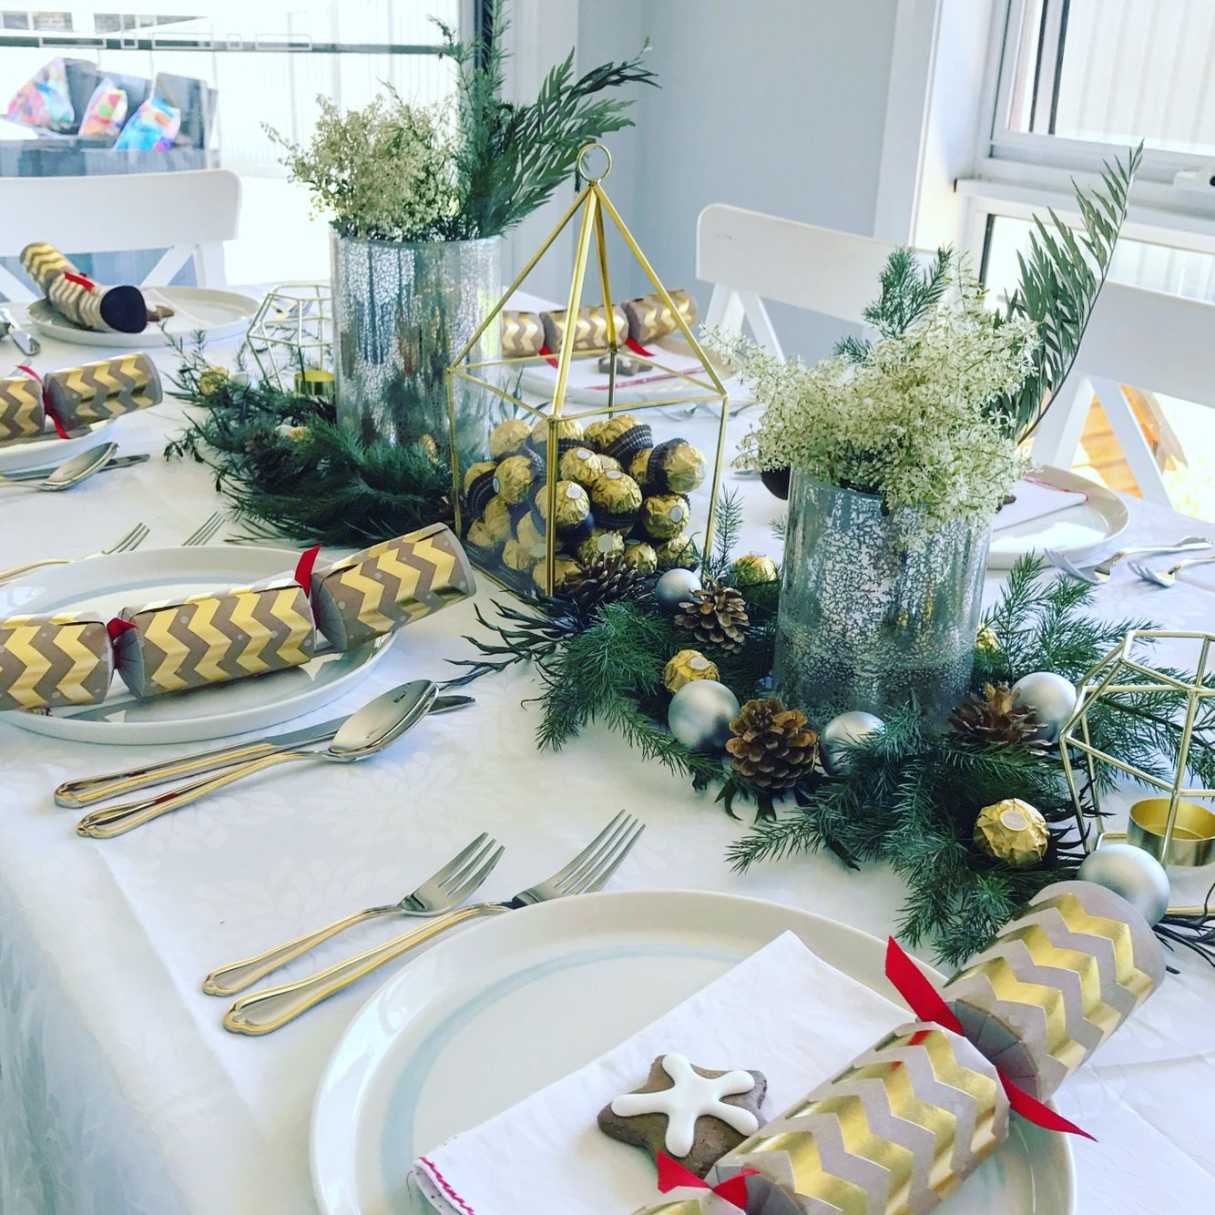 What Are Bon Bons In Table Settings?